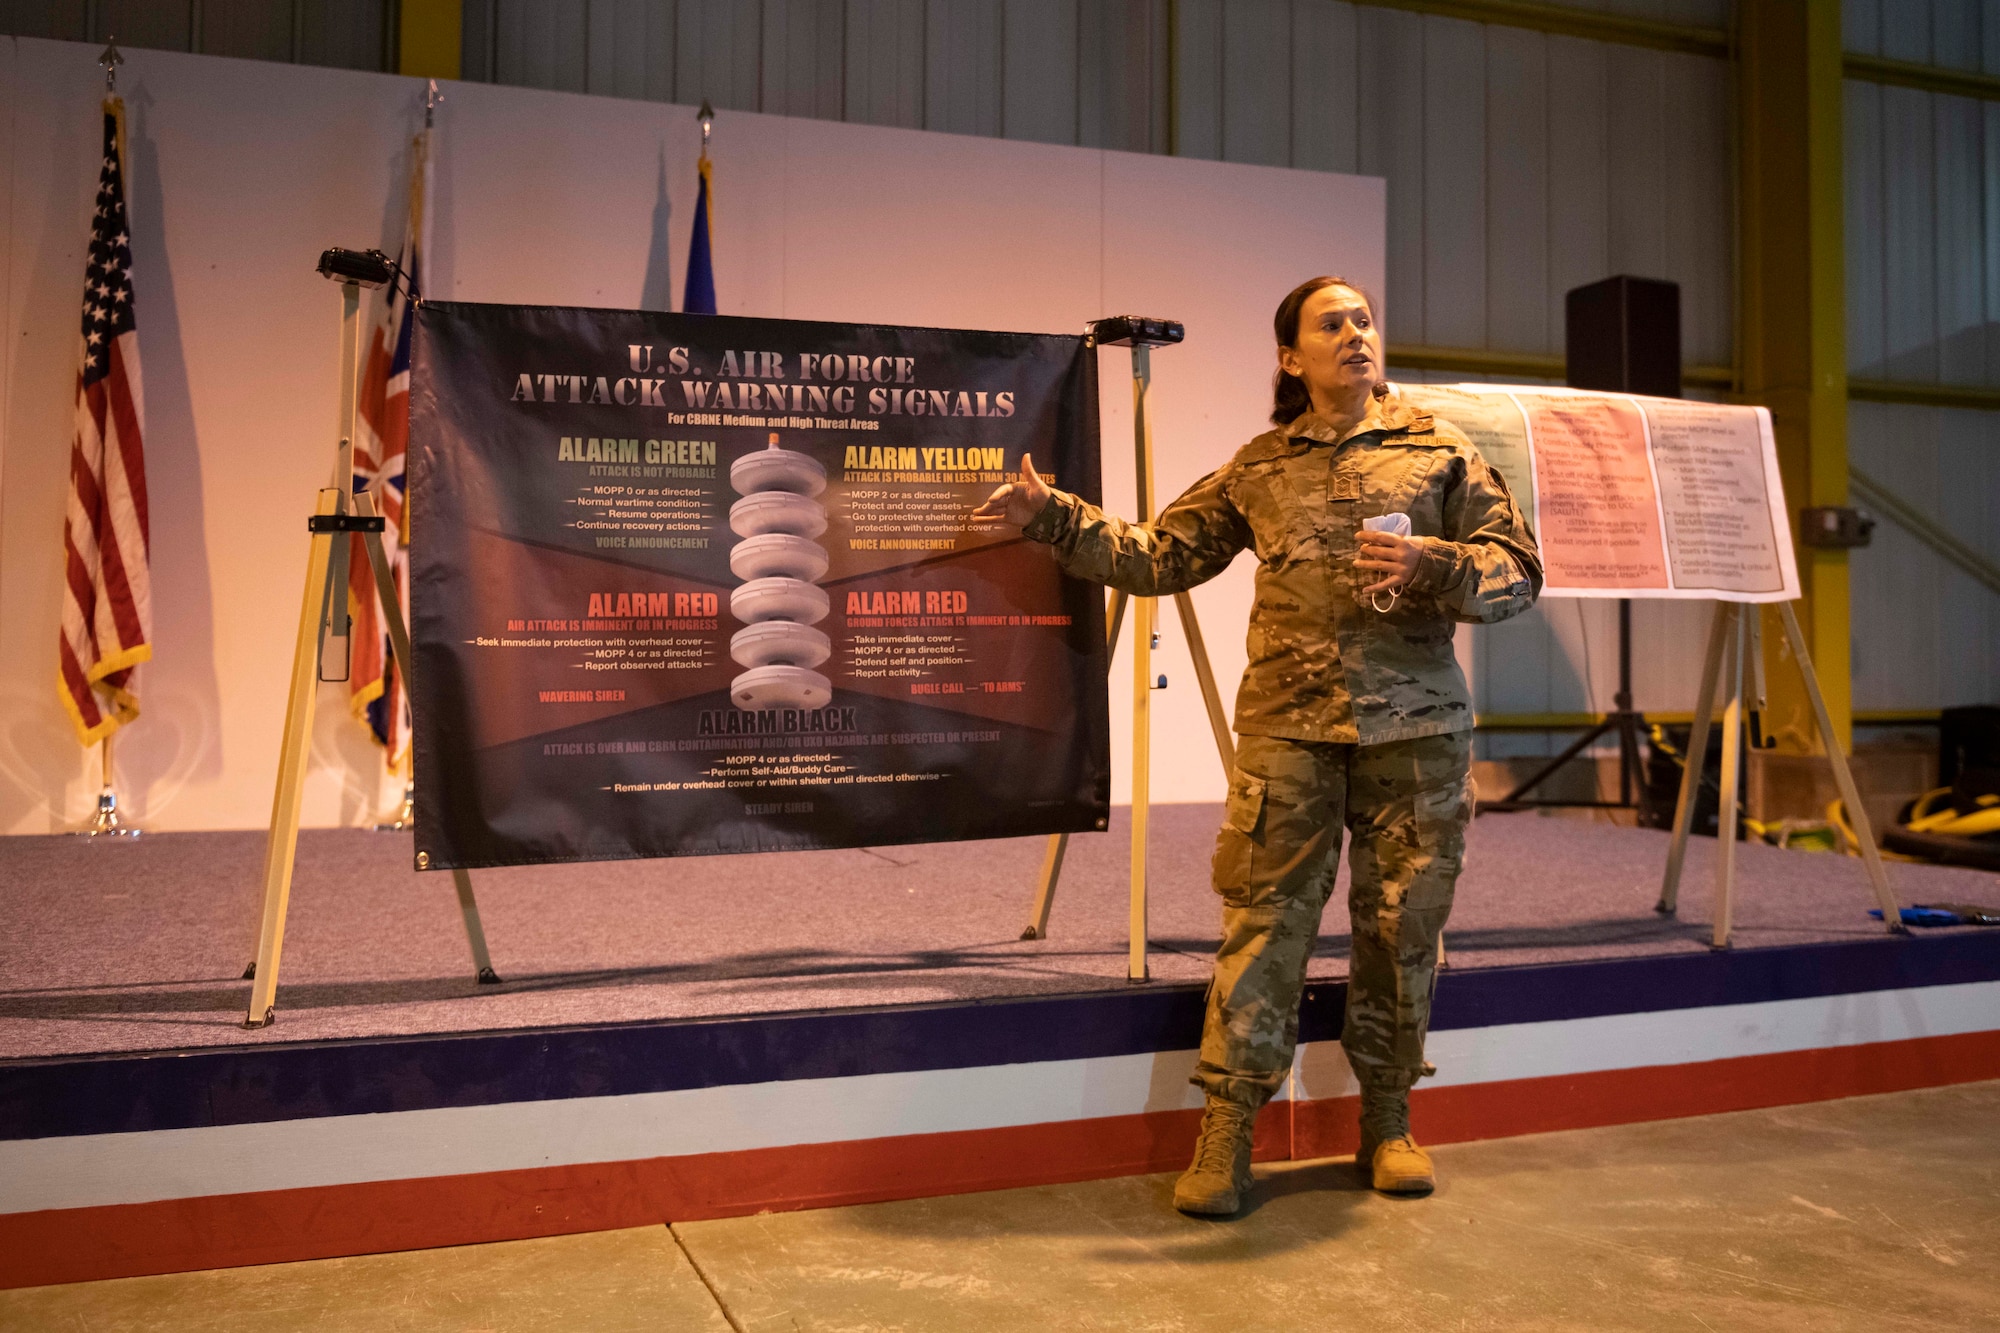 U.S. Air Force Master Sgt. Terri Adams, 423rd Civil Engineering Squadron NCO in charge of emergency management, briefs Airmen from the 501st Combat Support Wing during Ability to Survive and Operate training at RAF Alconbury, England, Aug. 26, 2021. The ATSO rodeo was designed to reinforce Airmen’s ability to properly utilize their MOPP gear in a potential chemical environment. (U.S. Air Force photo by Senior Airman Jennifer Zima)